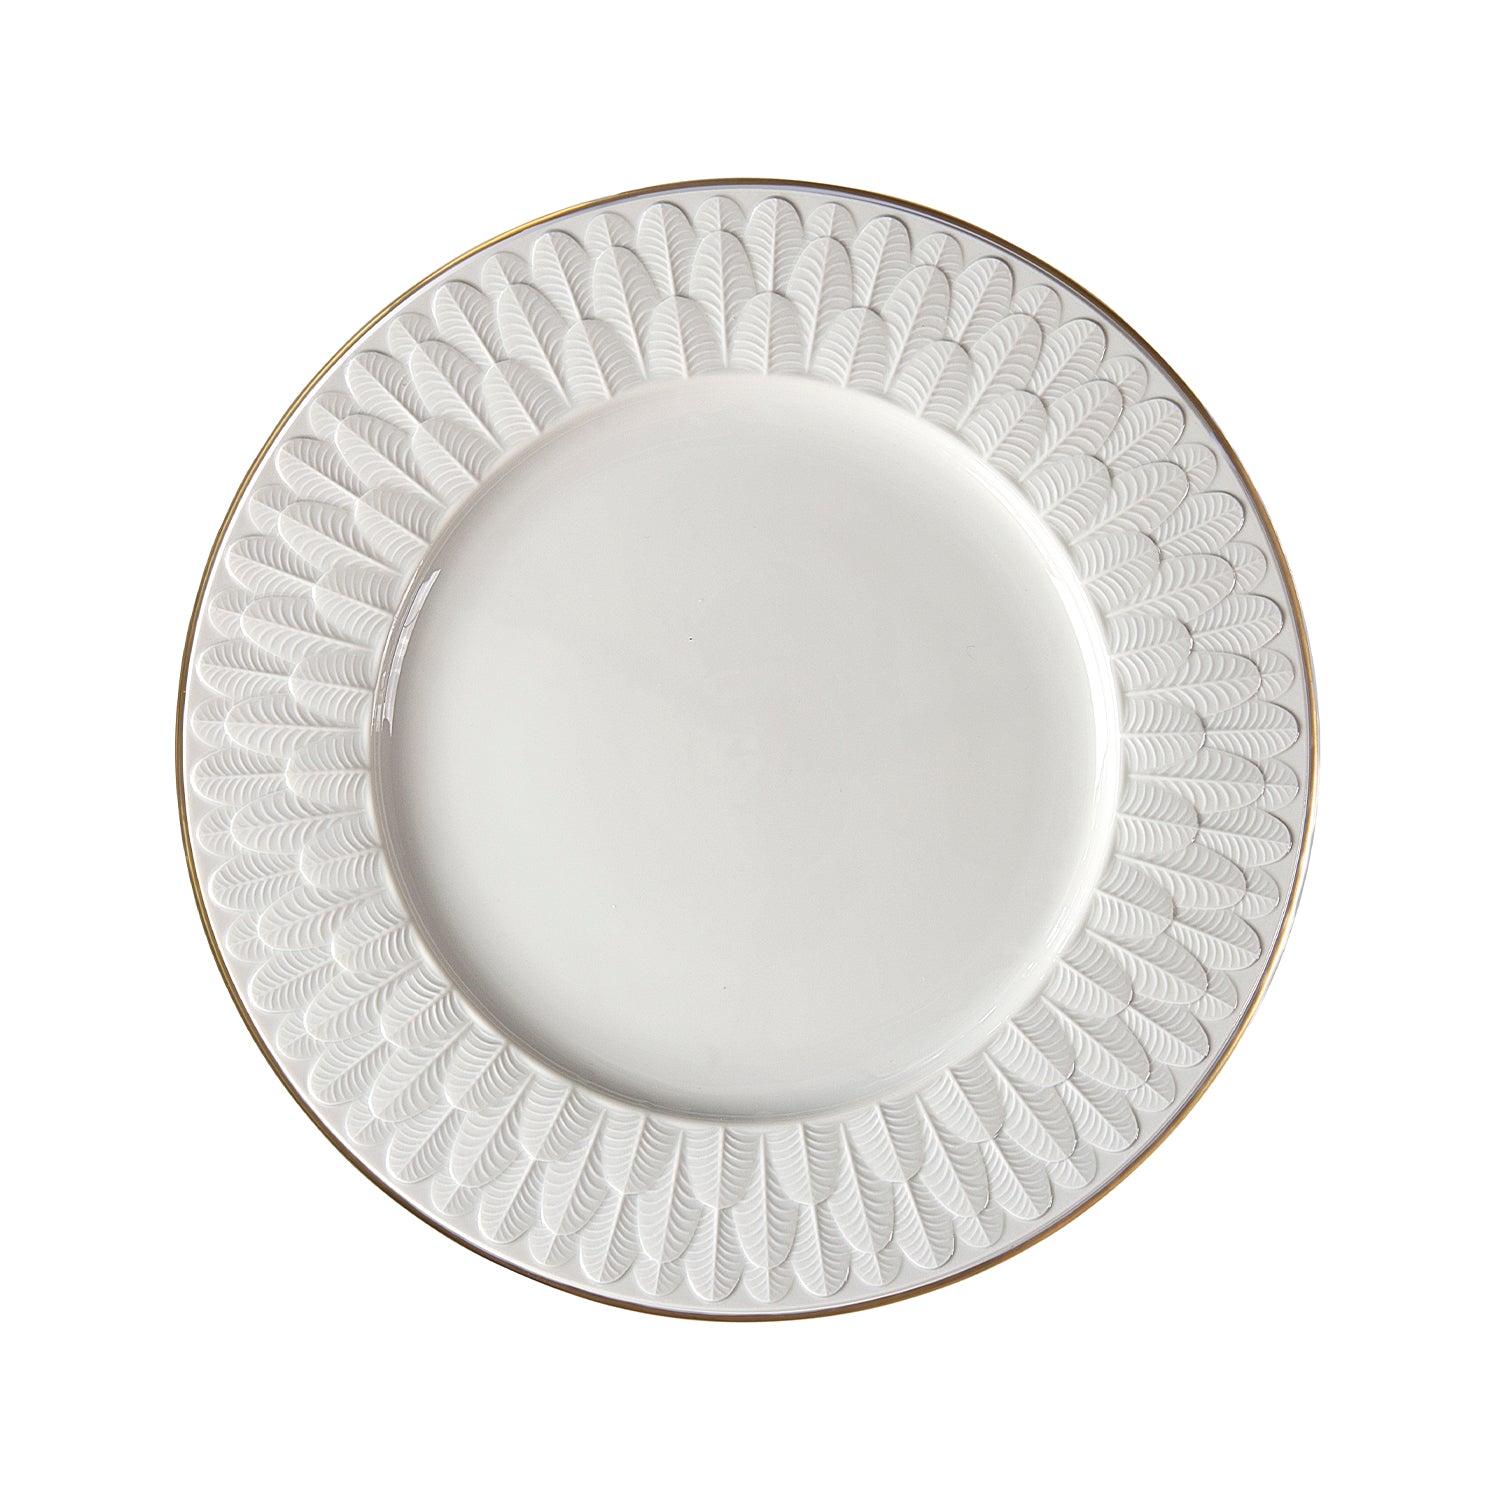 Peacock White & Gold Lay Plate